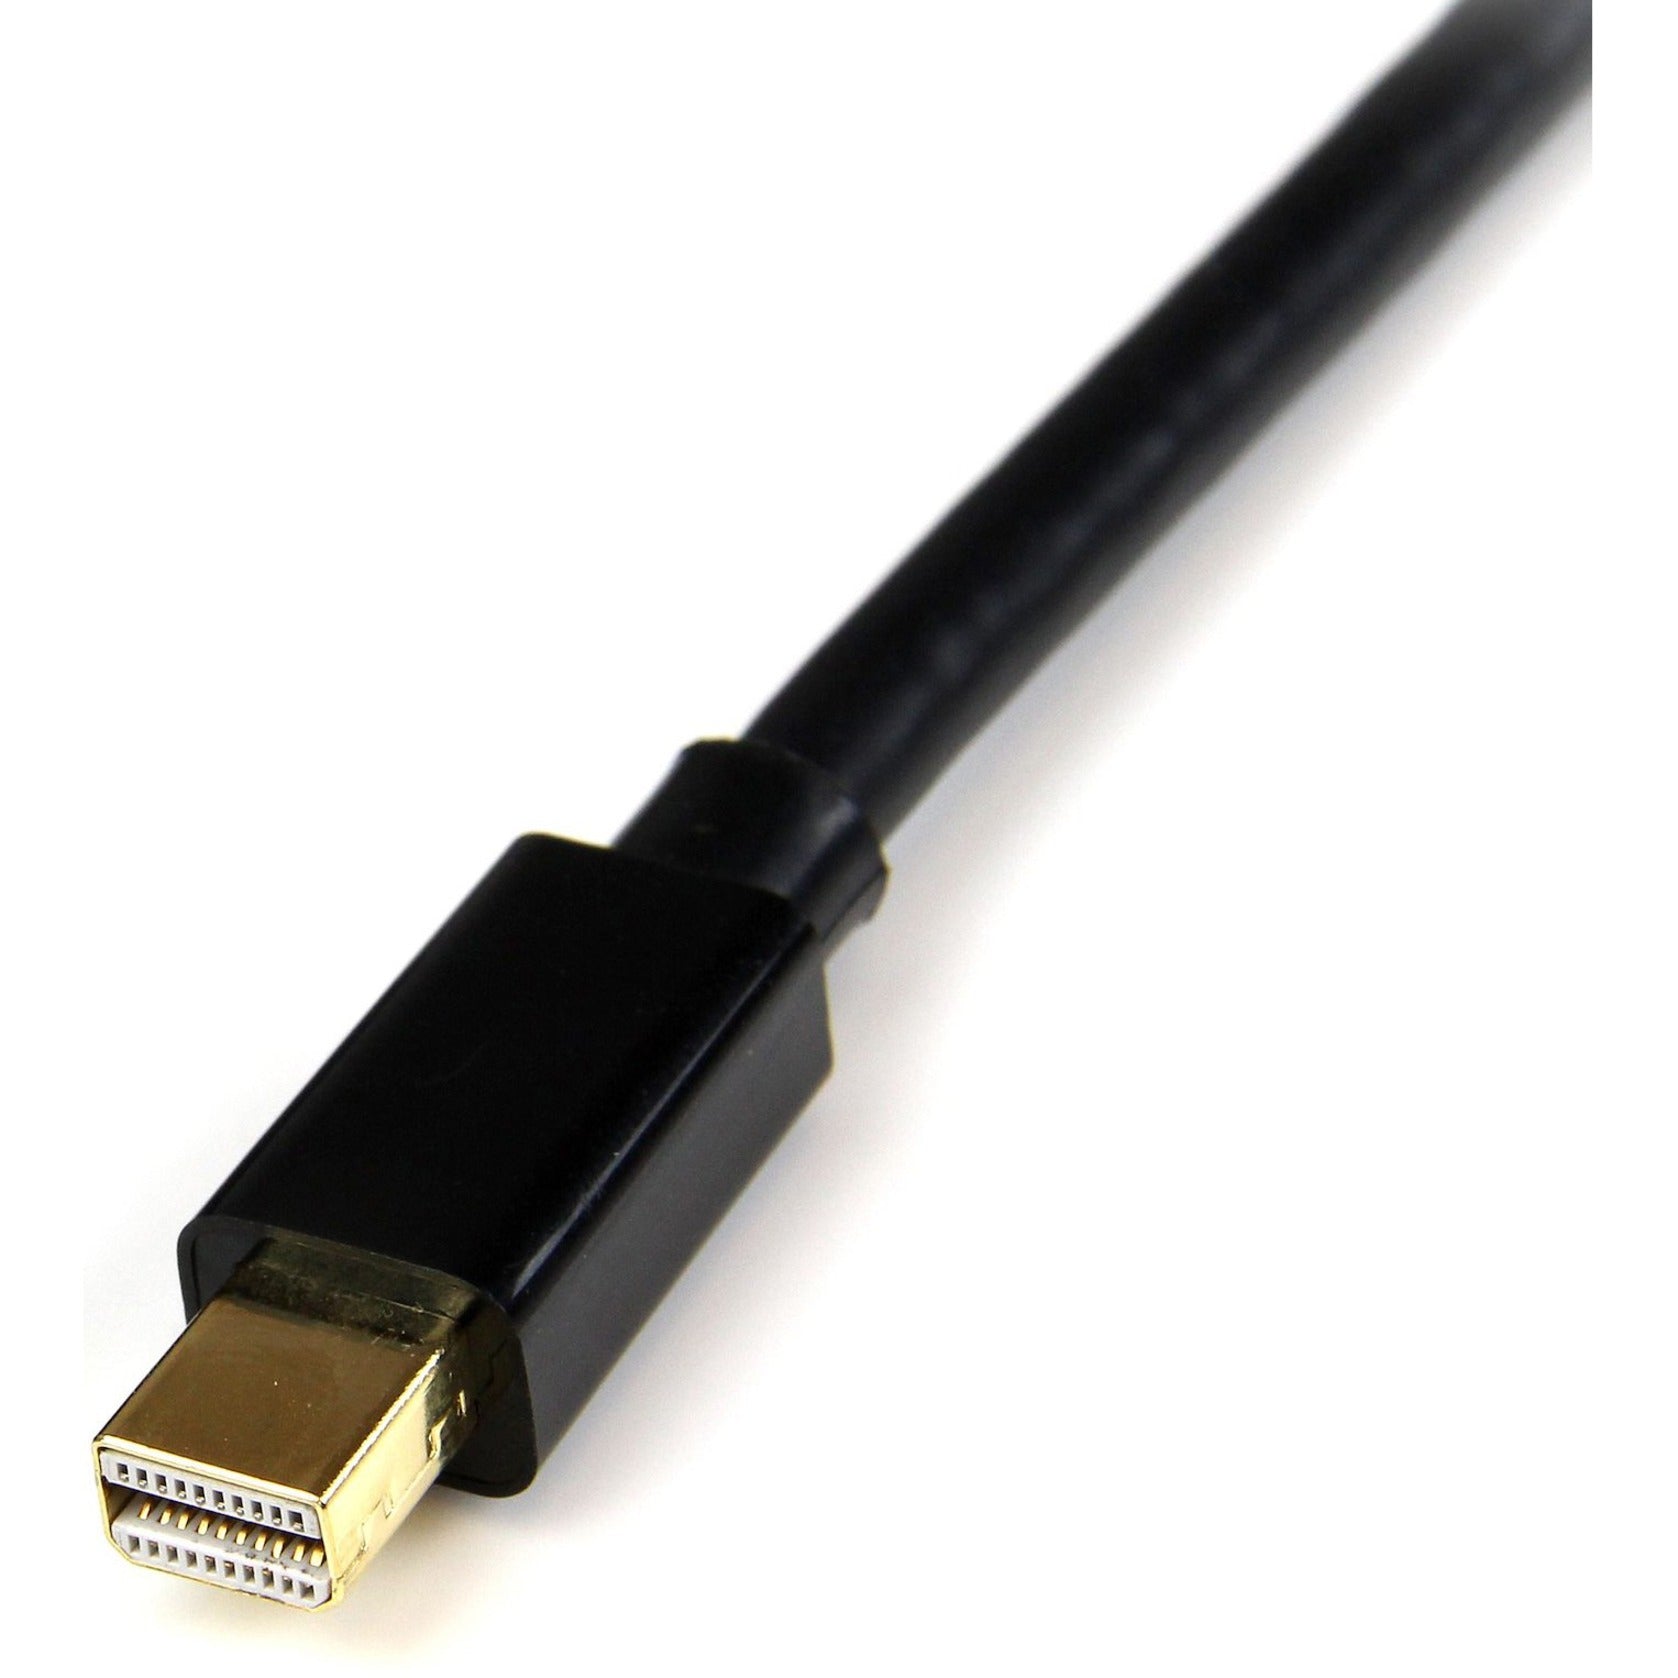 StarTech.com MDPEXT6 6 ft Mini DisplayPort Video Extension Cable - M/F, 4k Support